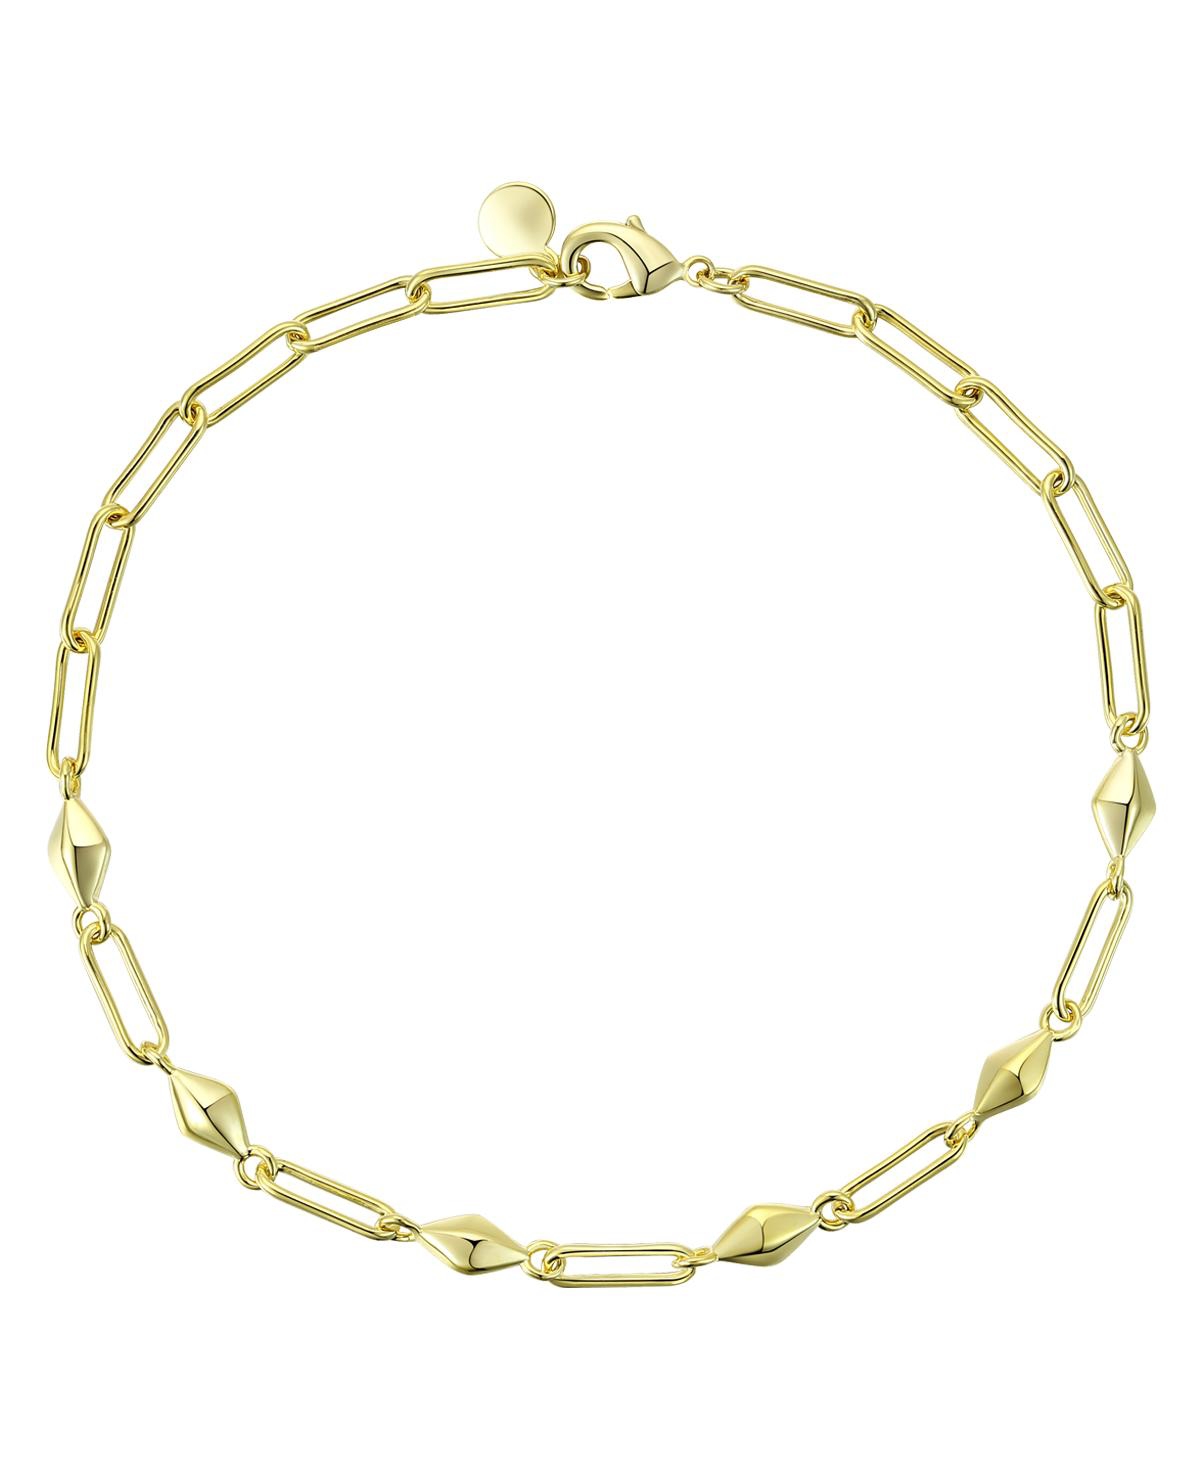 Sophisticated 14K Gold Plated Paperclip Link & Chain Bracelet - Gold